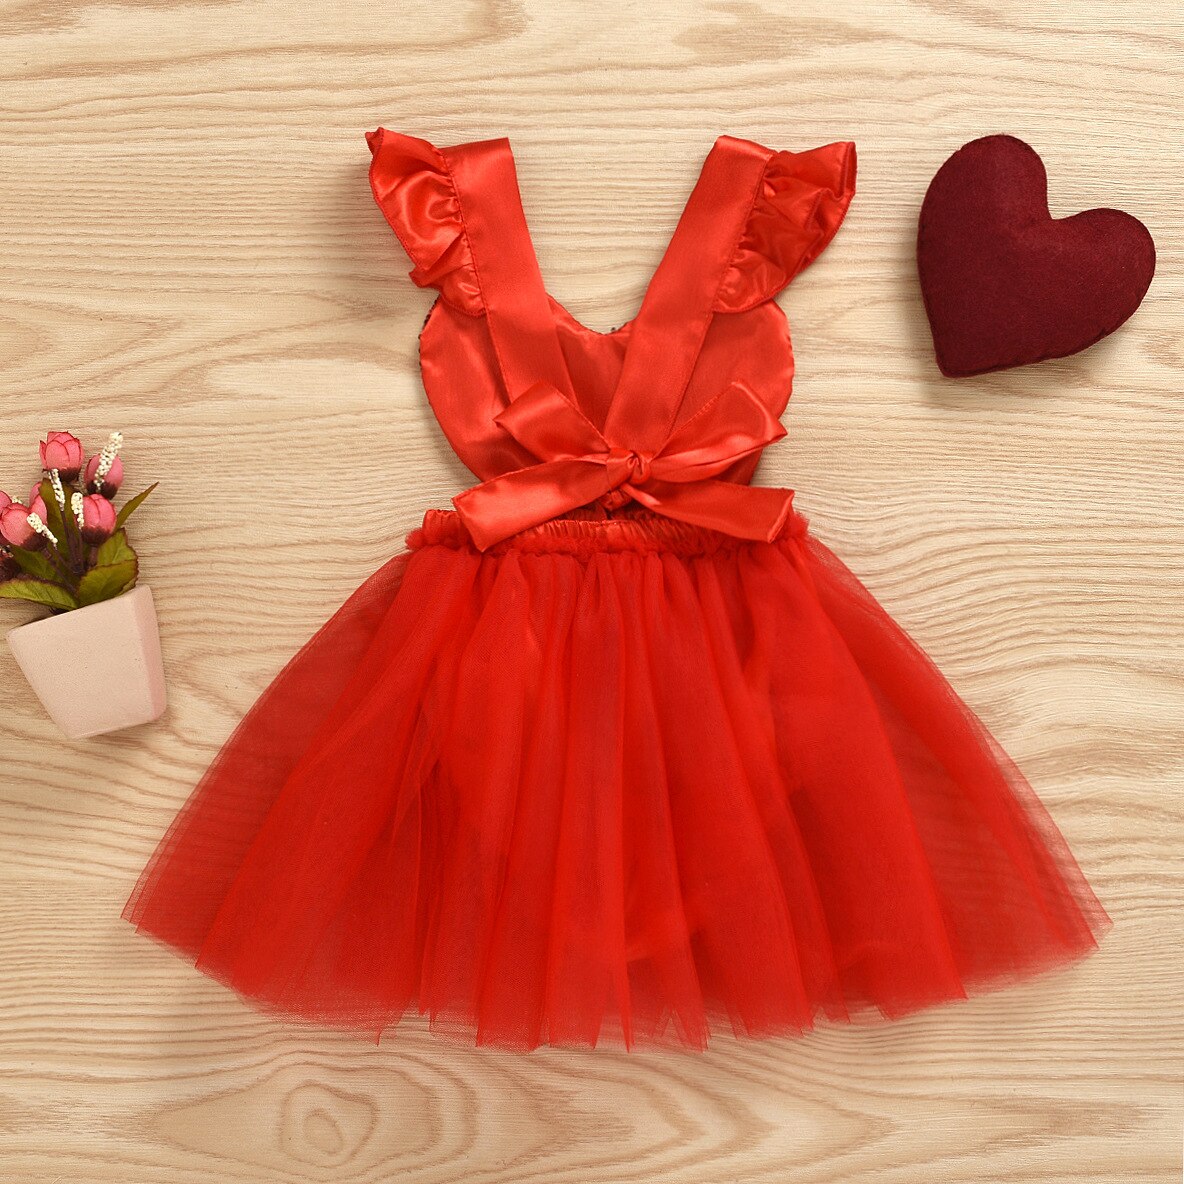 Valentines-Day-Baby-Girls-Dress-Party-Princess-Dresses-Red-Flying-Sleeve-Love-Heart-Sequined-Mesh-Stitching-2